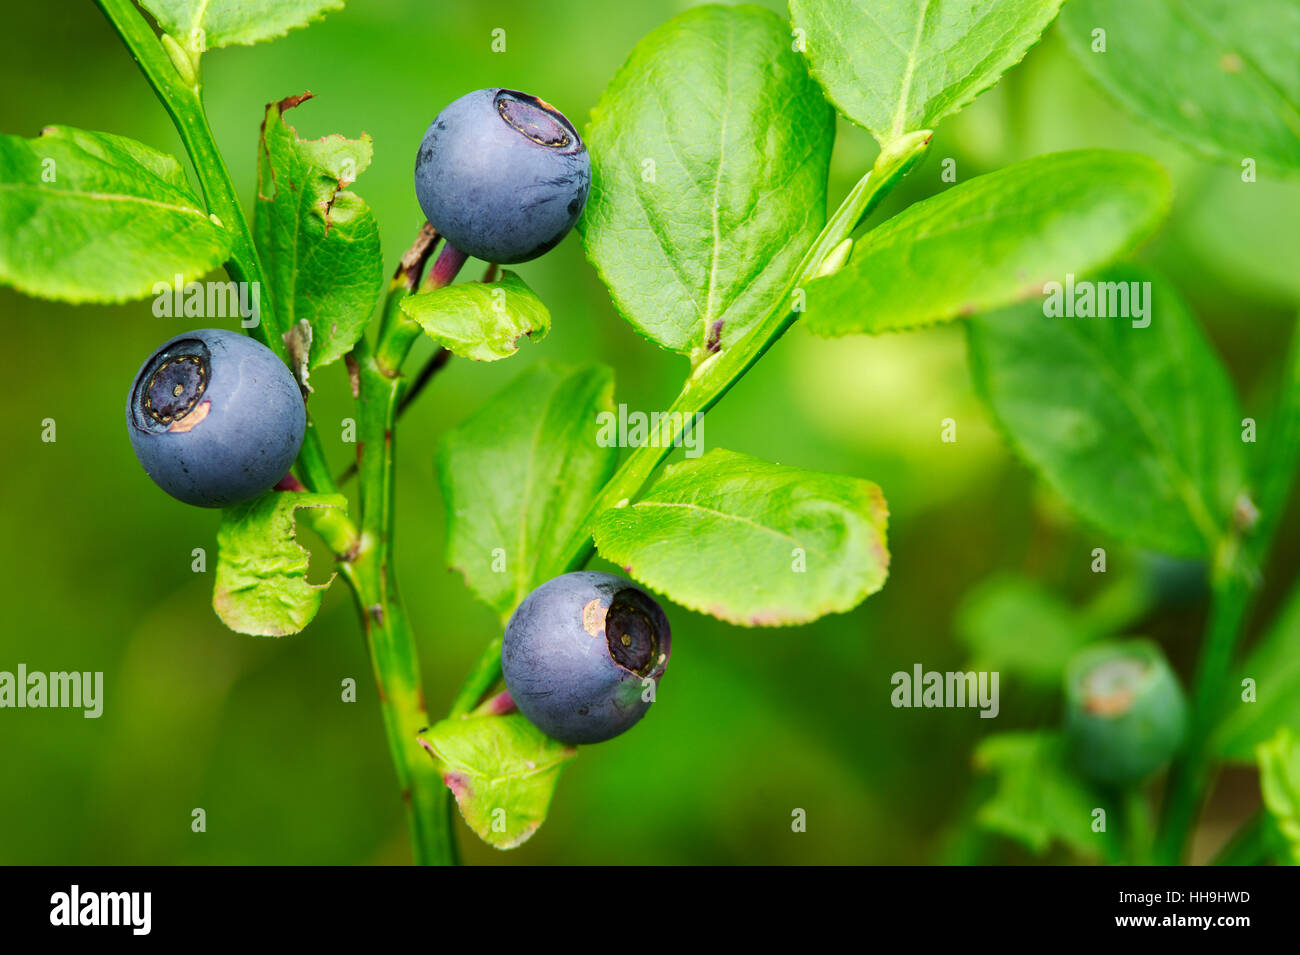 Fores fruits. Wild ripe bilberry fruits. Close up of bilberry berries growing on bush in the forest. Pomerania, northern Poland. Stock Photo